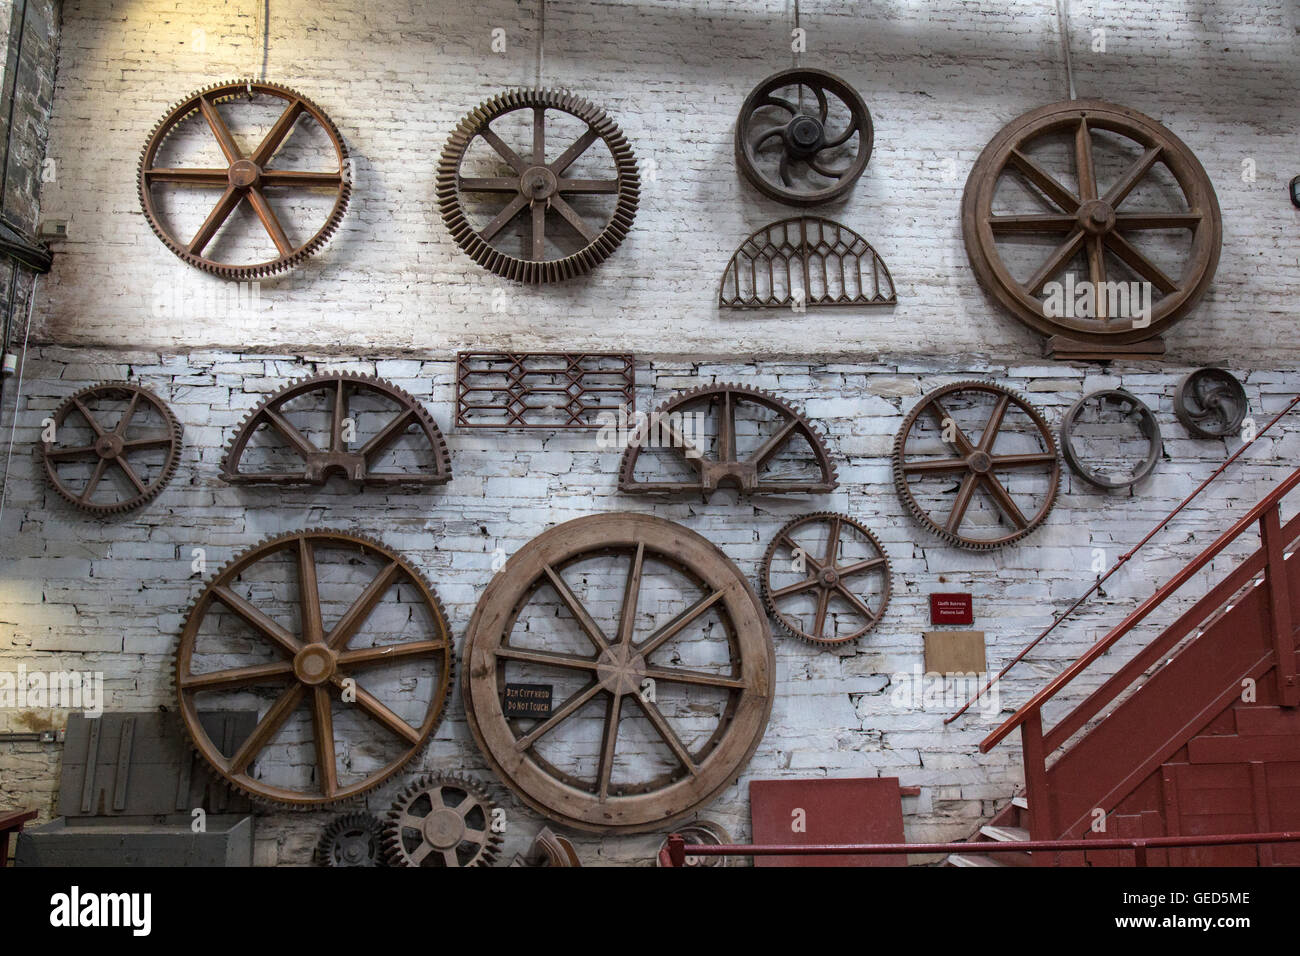 Wooden molds for the casting of iron wheels, hanging on the walls of a room inside the National Slate Museum in Llanberis, Wales Stock Photo